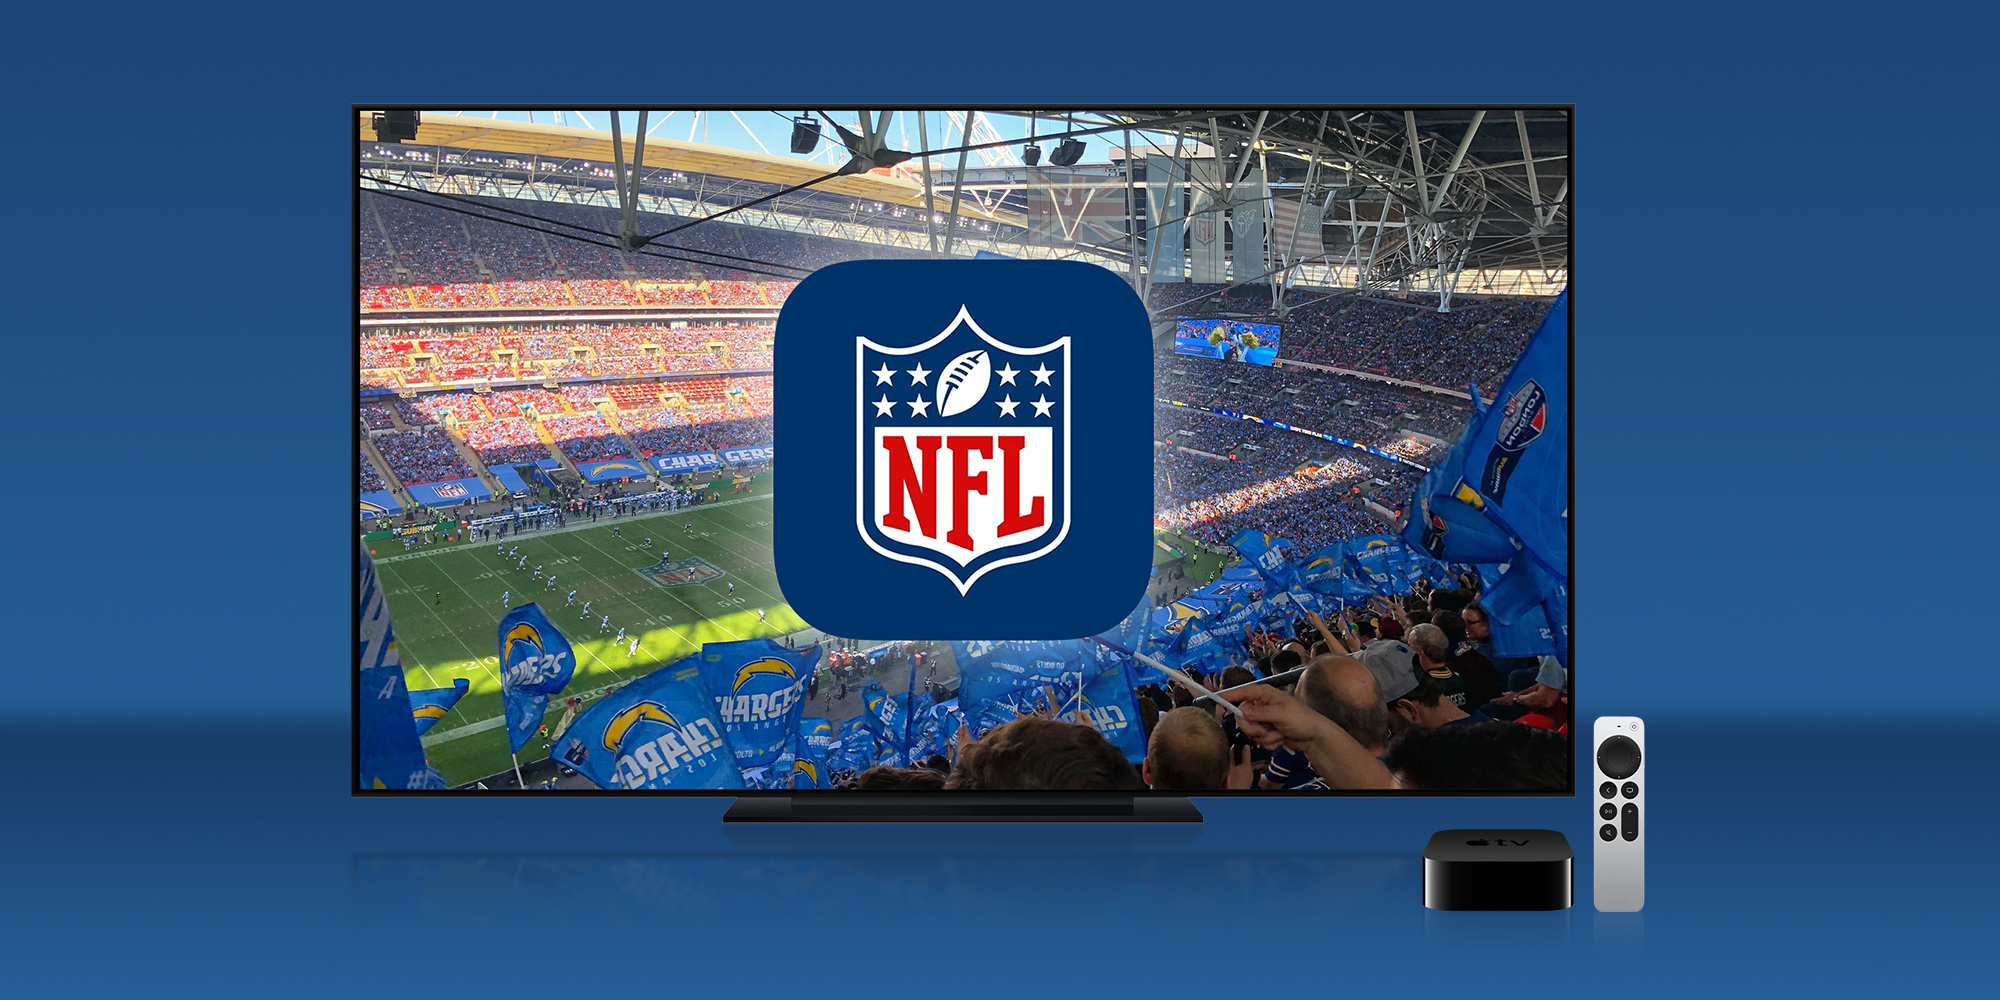 NFL Sunday Ticket for Bars & Restaurants - Its All About Satellites